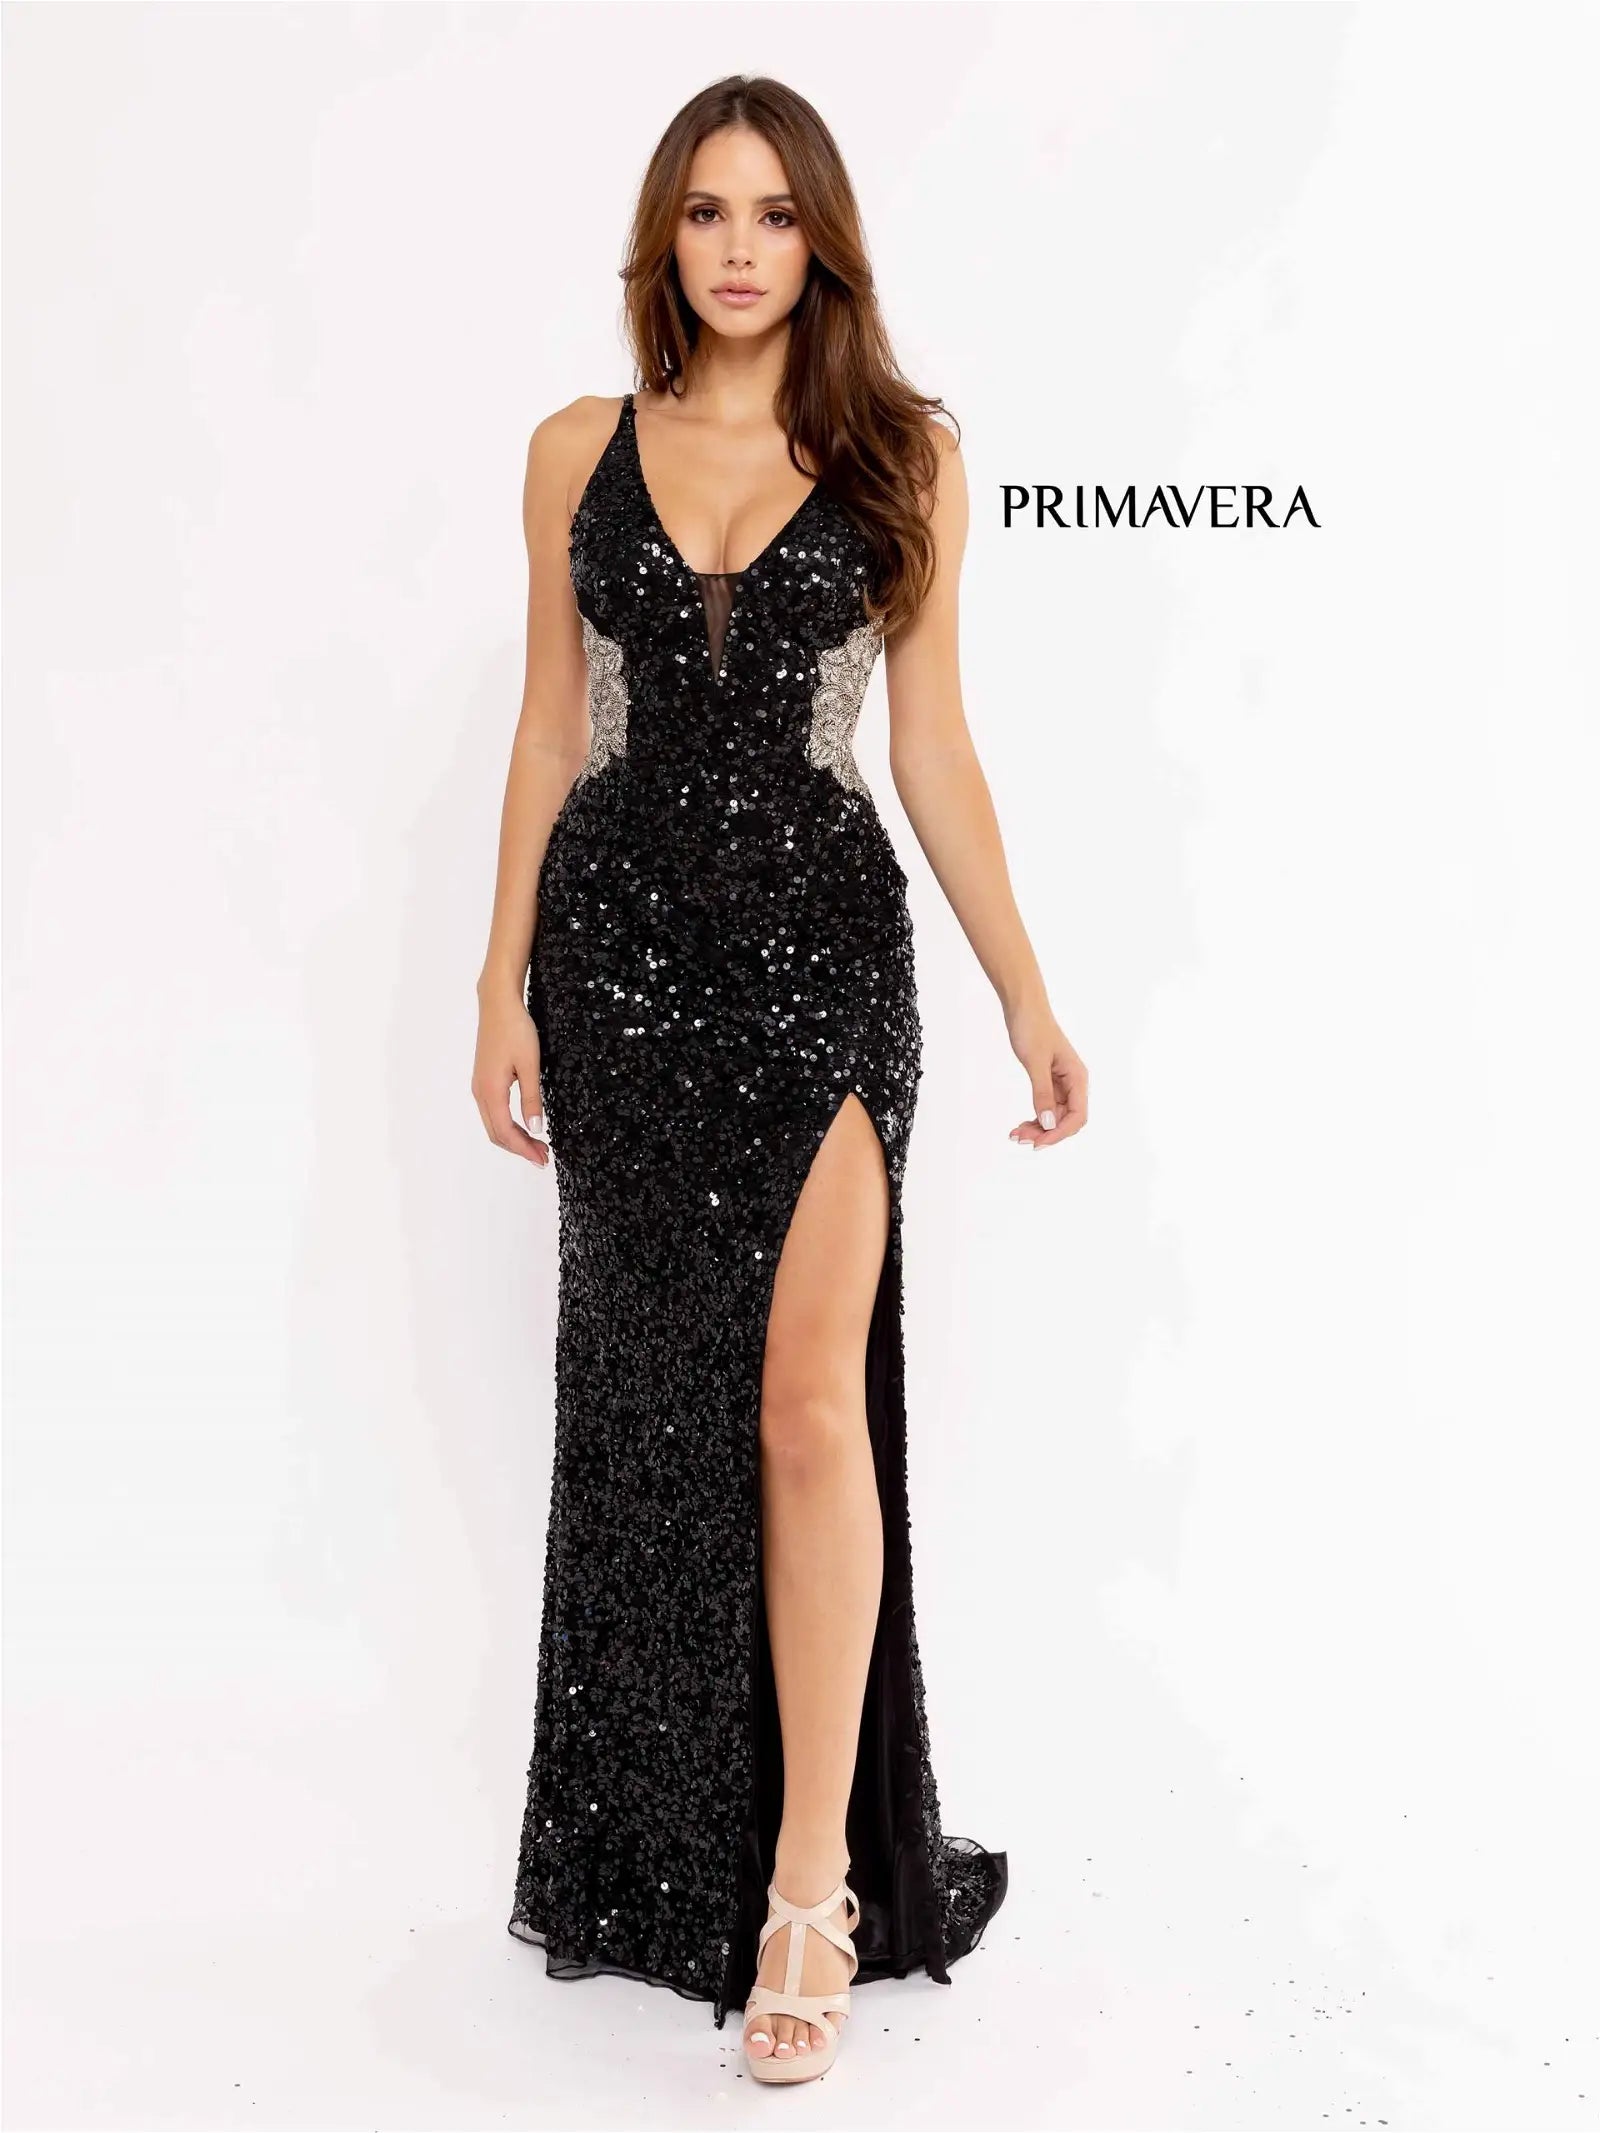 Primavera Couture 3955 Prom Dress Long Beaded Gown. This gown has a beautiful design on the side. 